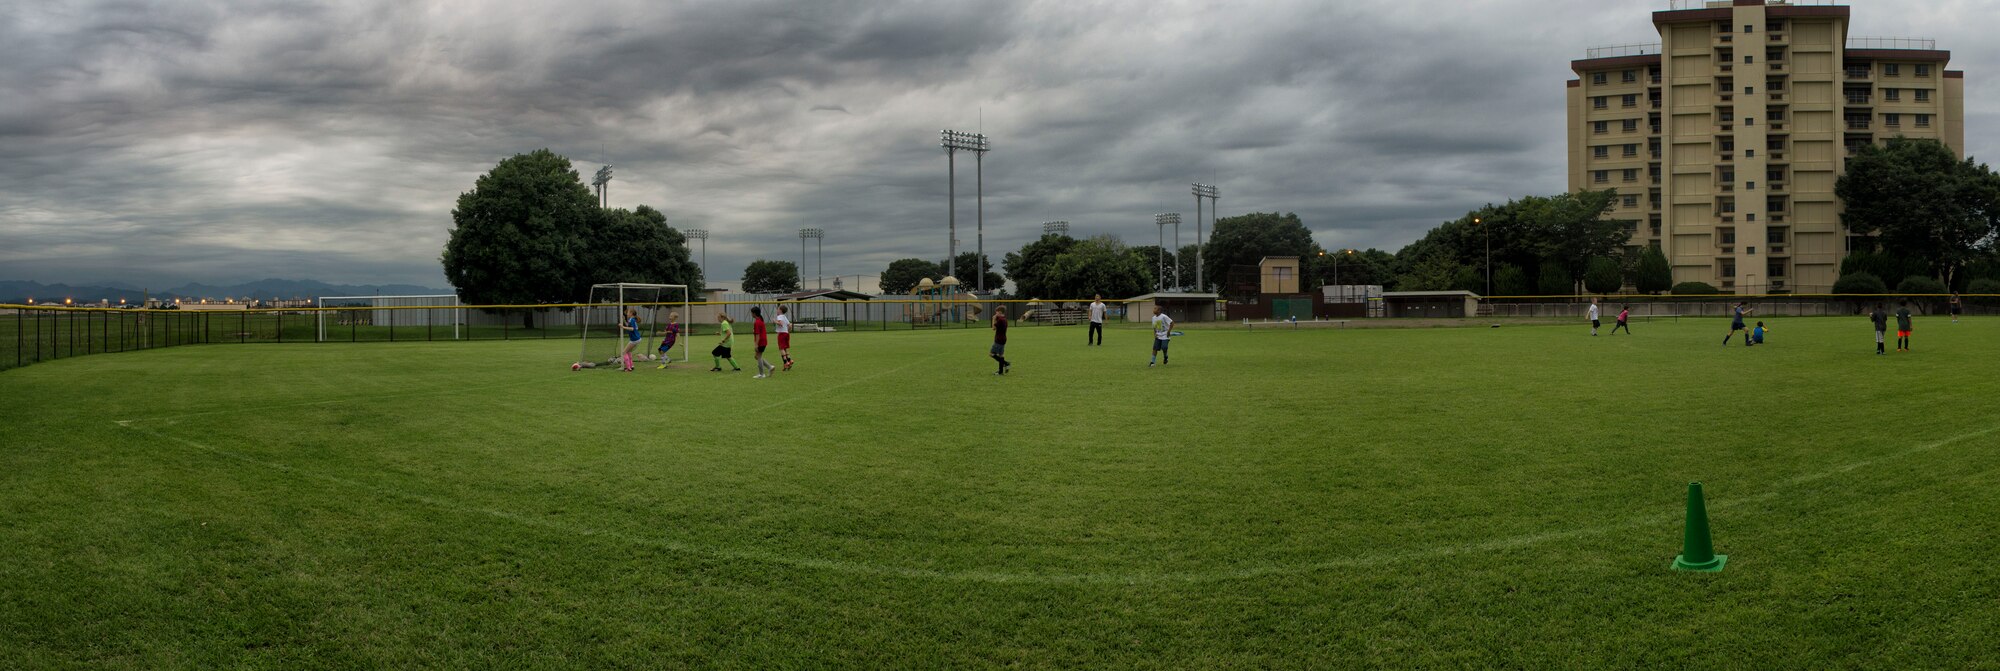 Youth soccer participant engage in a scrimmage on Friendship Field at Yokota Air Base, Japan, Sept. 15, 2015. The field is home to Yokota’s youth soccer program. (U.S. Air Force photo by Airman 1st Class Delano Scott/Released)